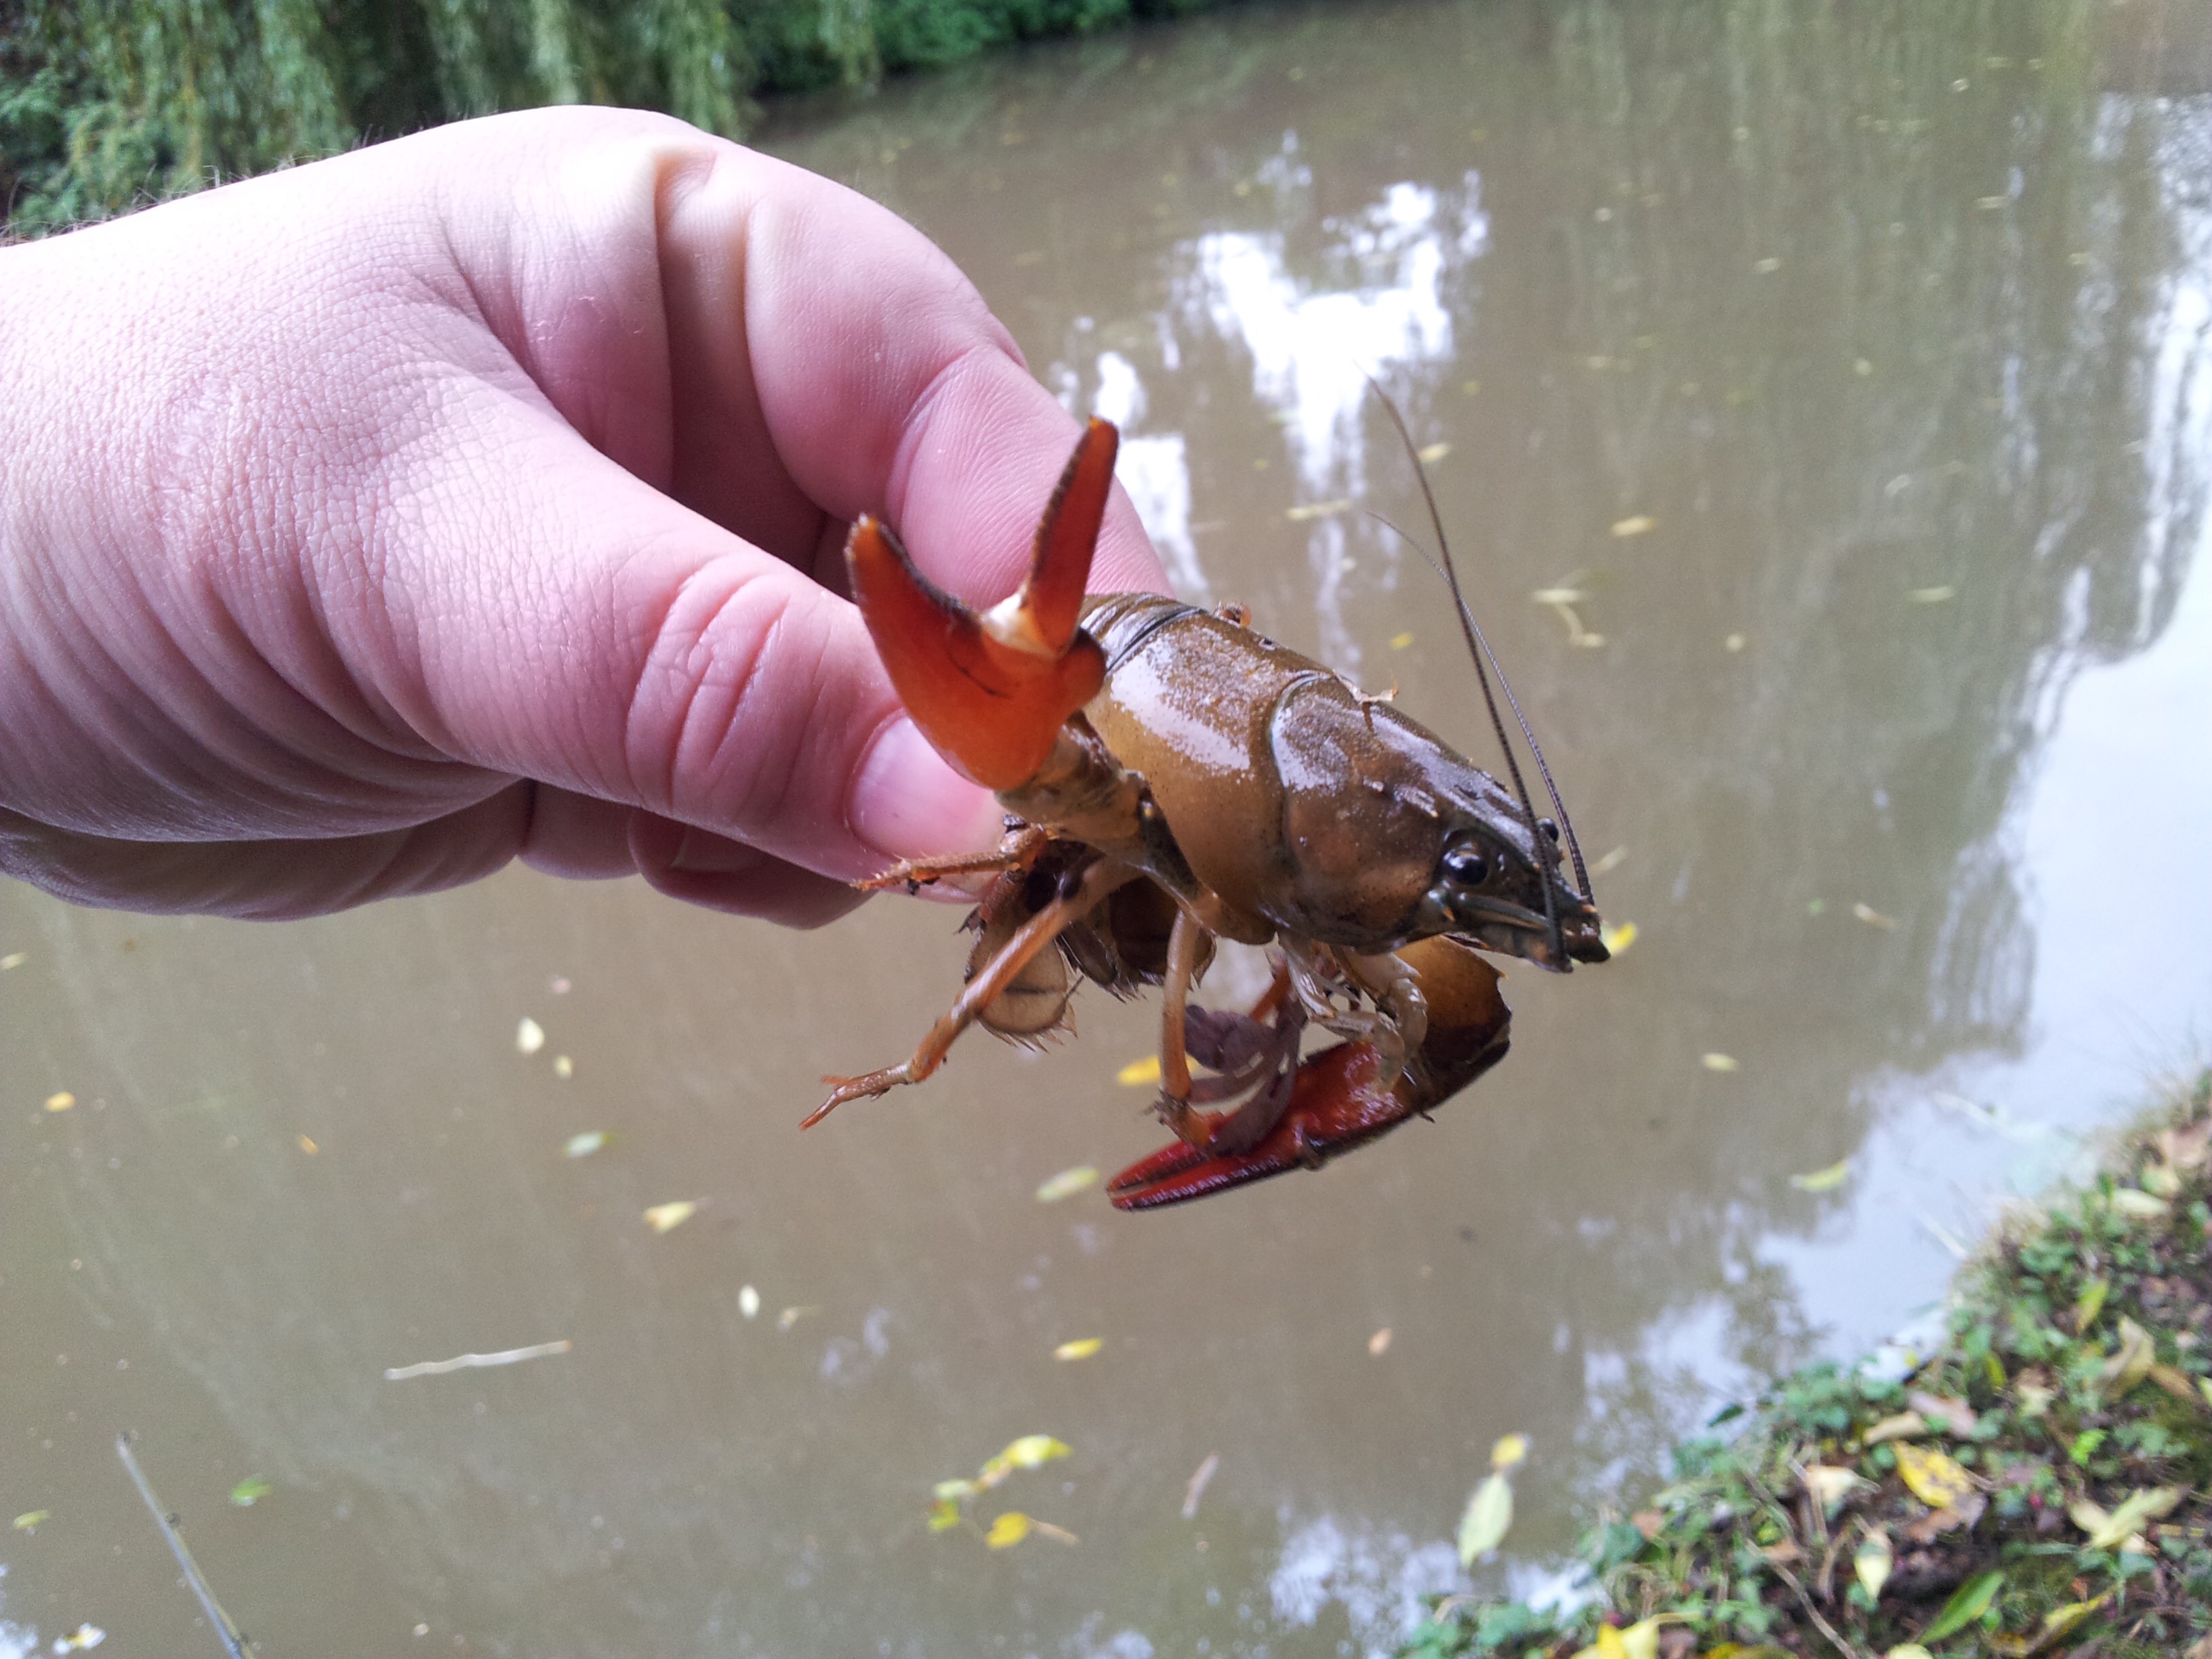 Signal crayfish an anglers enemy?